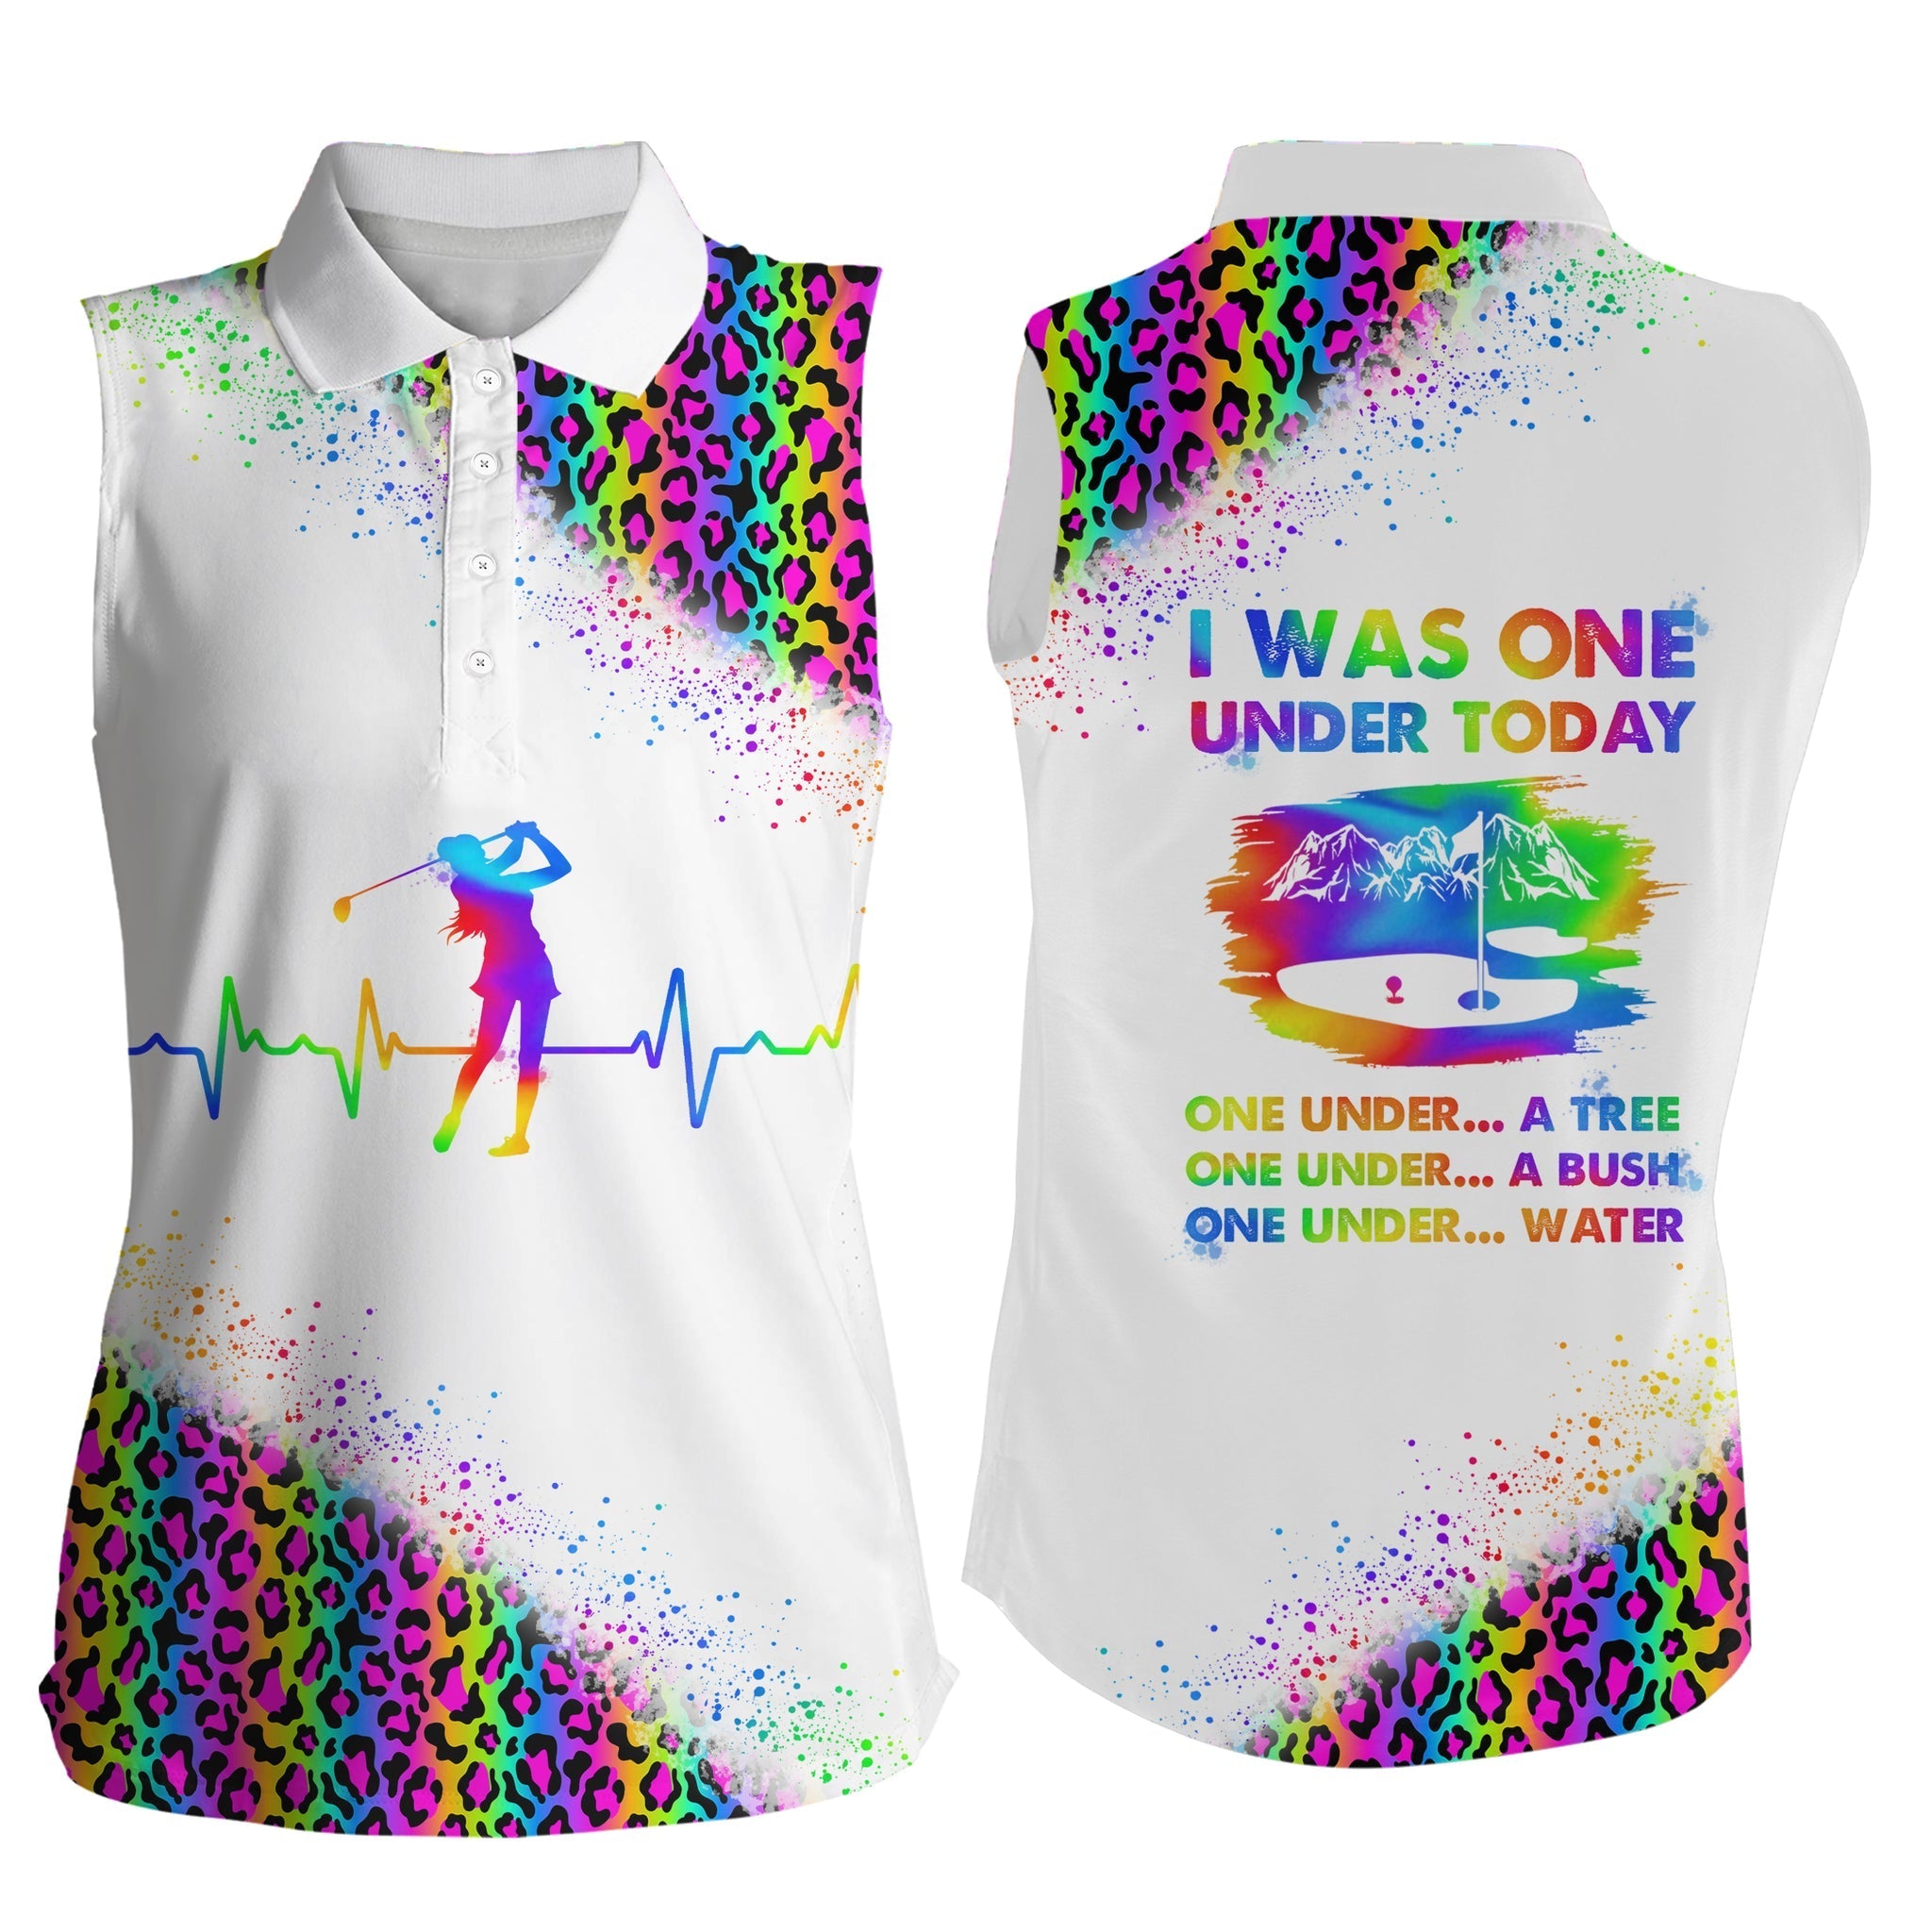 Funny Golf shirts for women I was one under today neon rainbow leopard women Sleeveless polo shirts